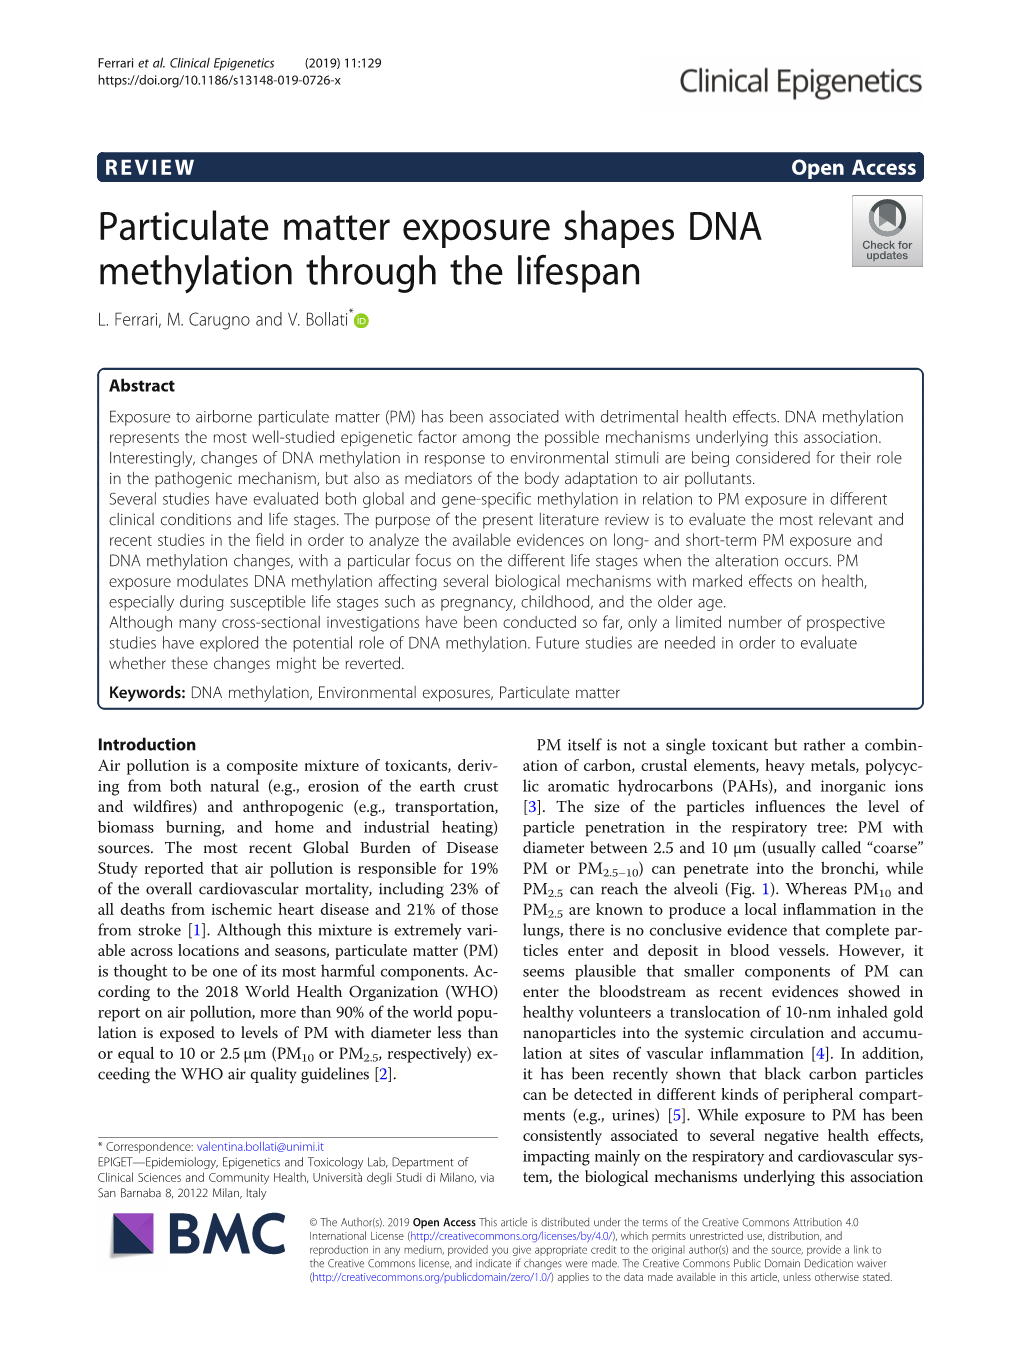 Particulate Matter Exposure Shapes DNA Methylation Through the Lifespan L